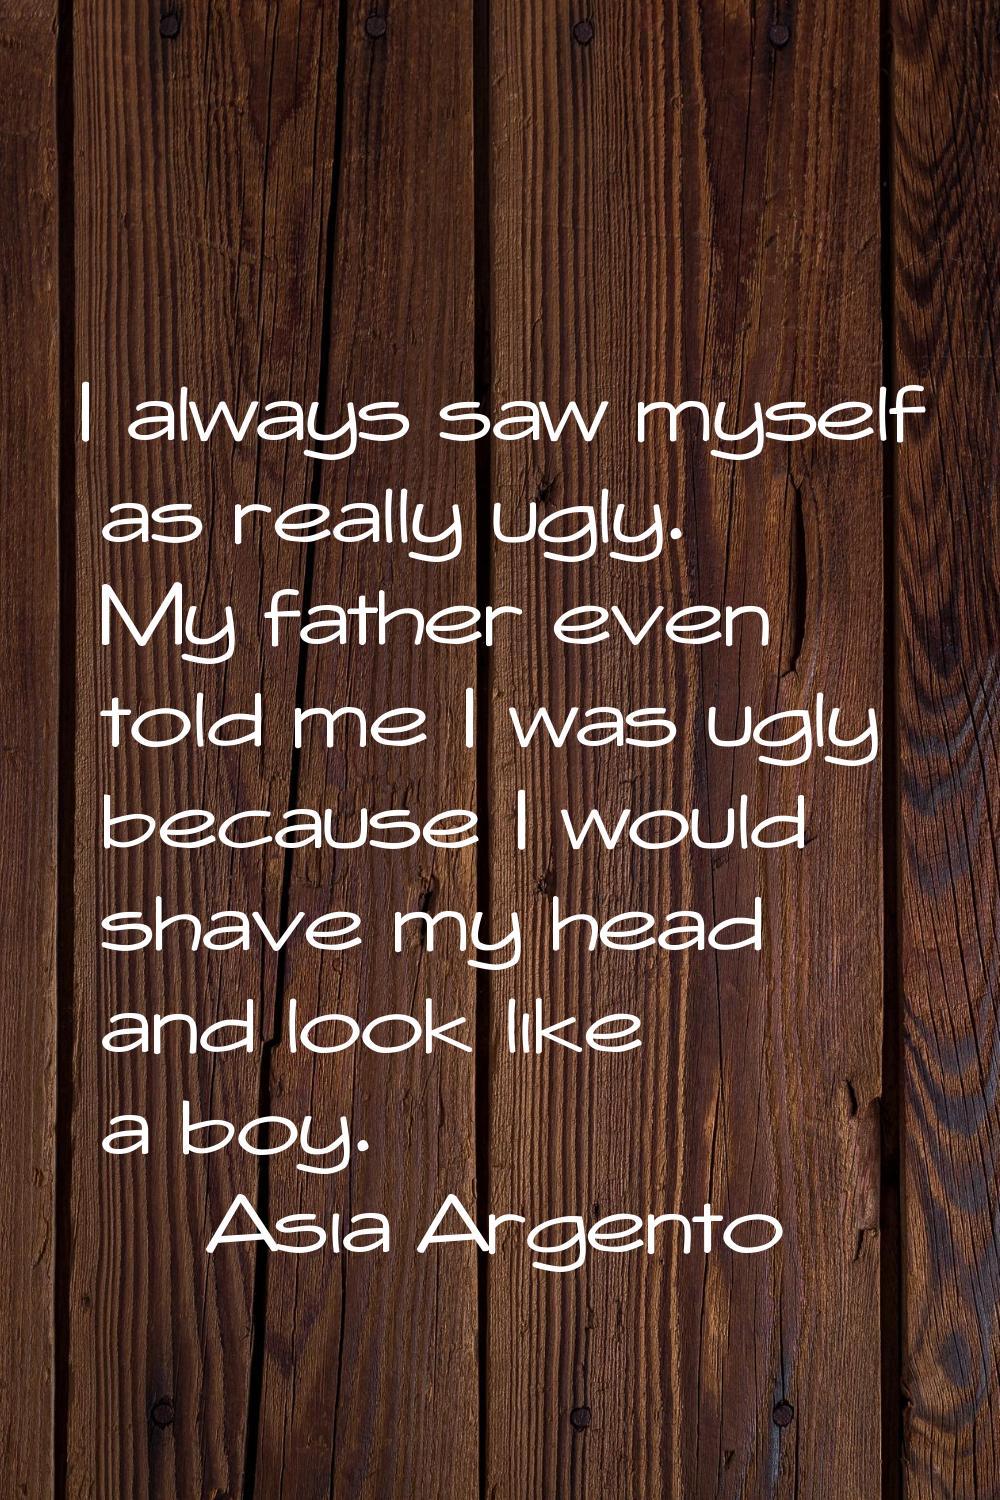 I always saw myself as really ugly. My father even told me I was ugly because I would shave my head